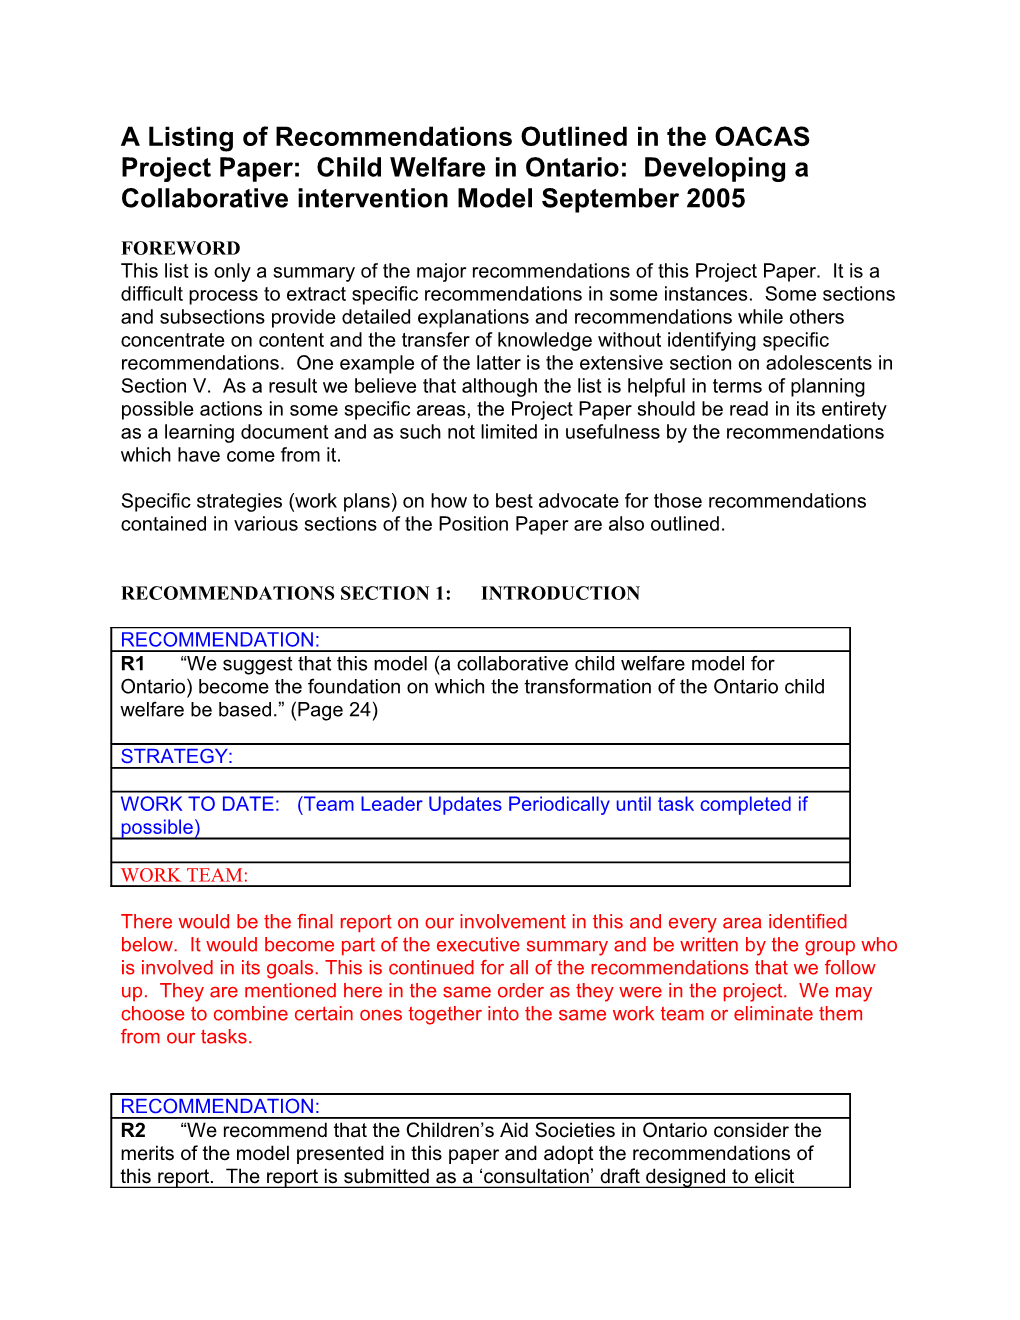 A Listing of Recommendations Outlined in the OACAS Project Paper: Child Welfare in Ontario